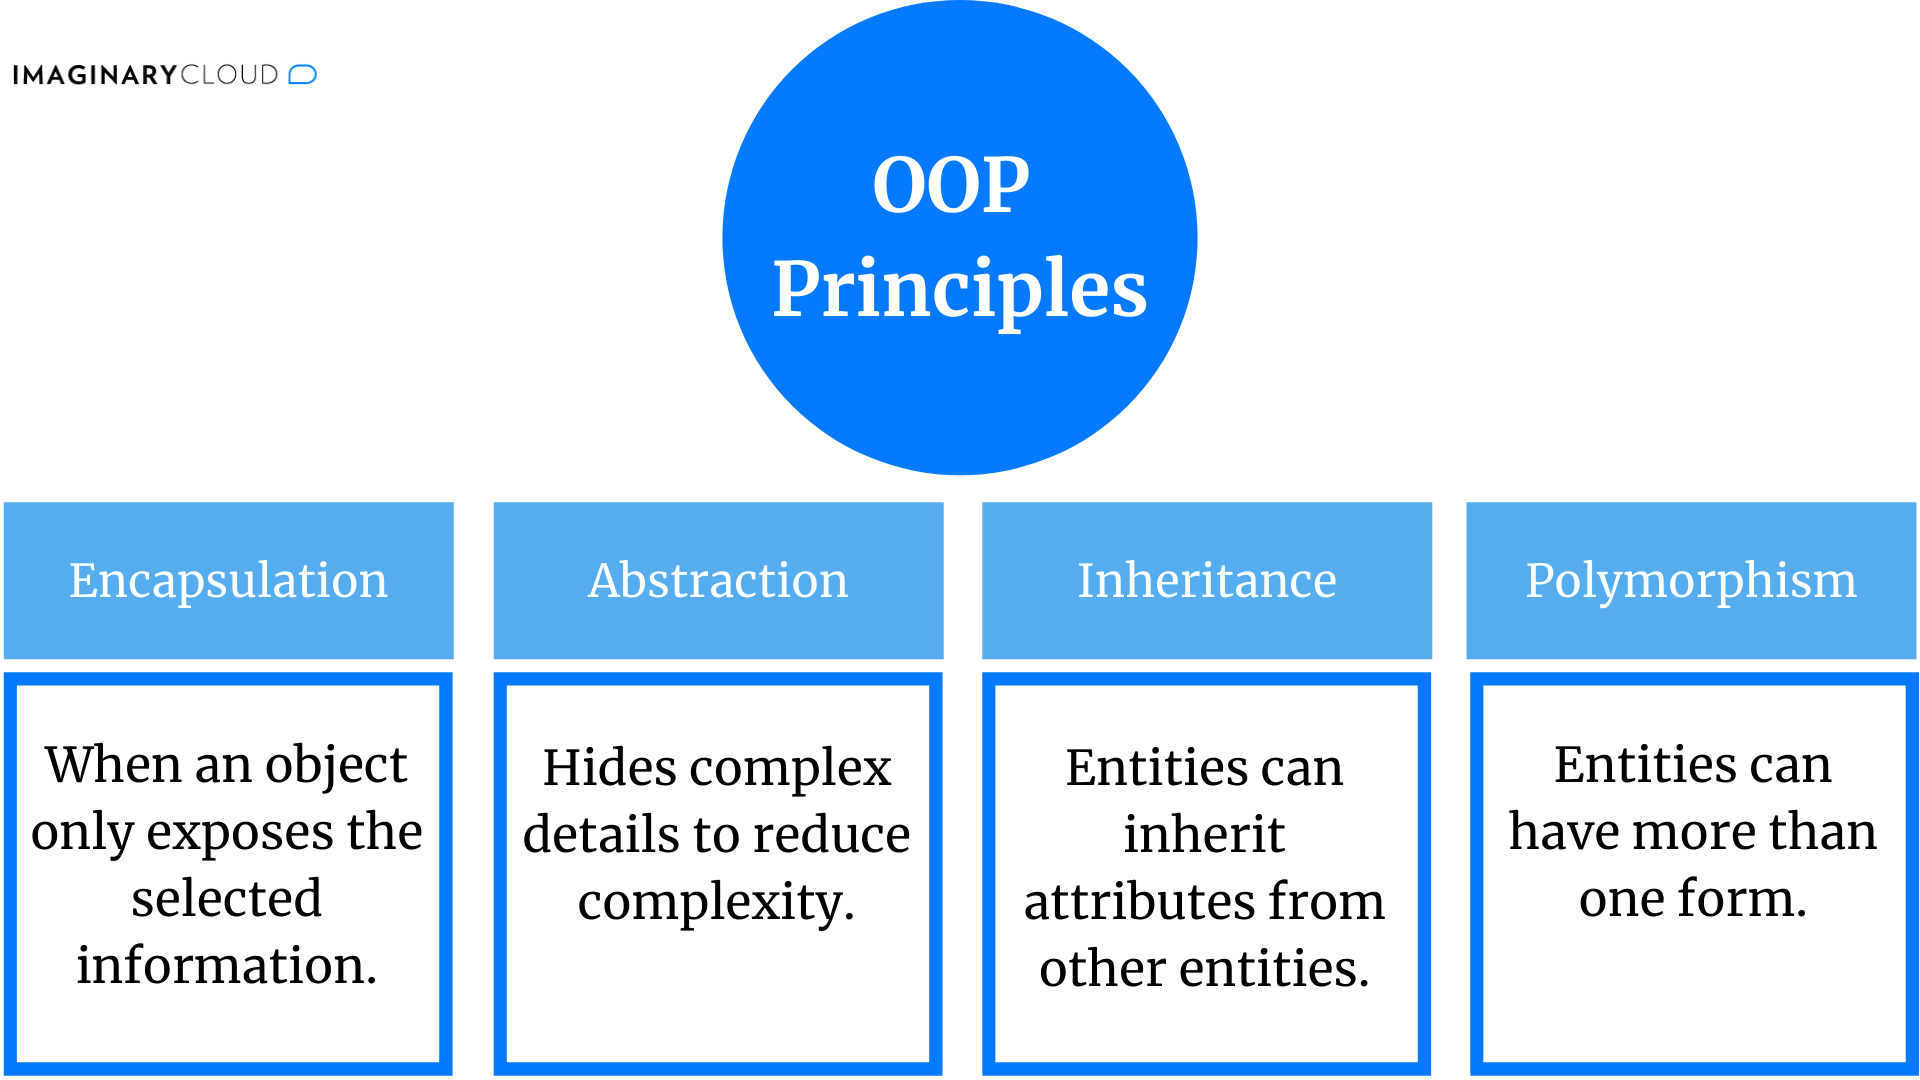 The four OOP Principles